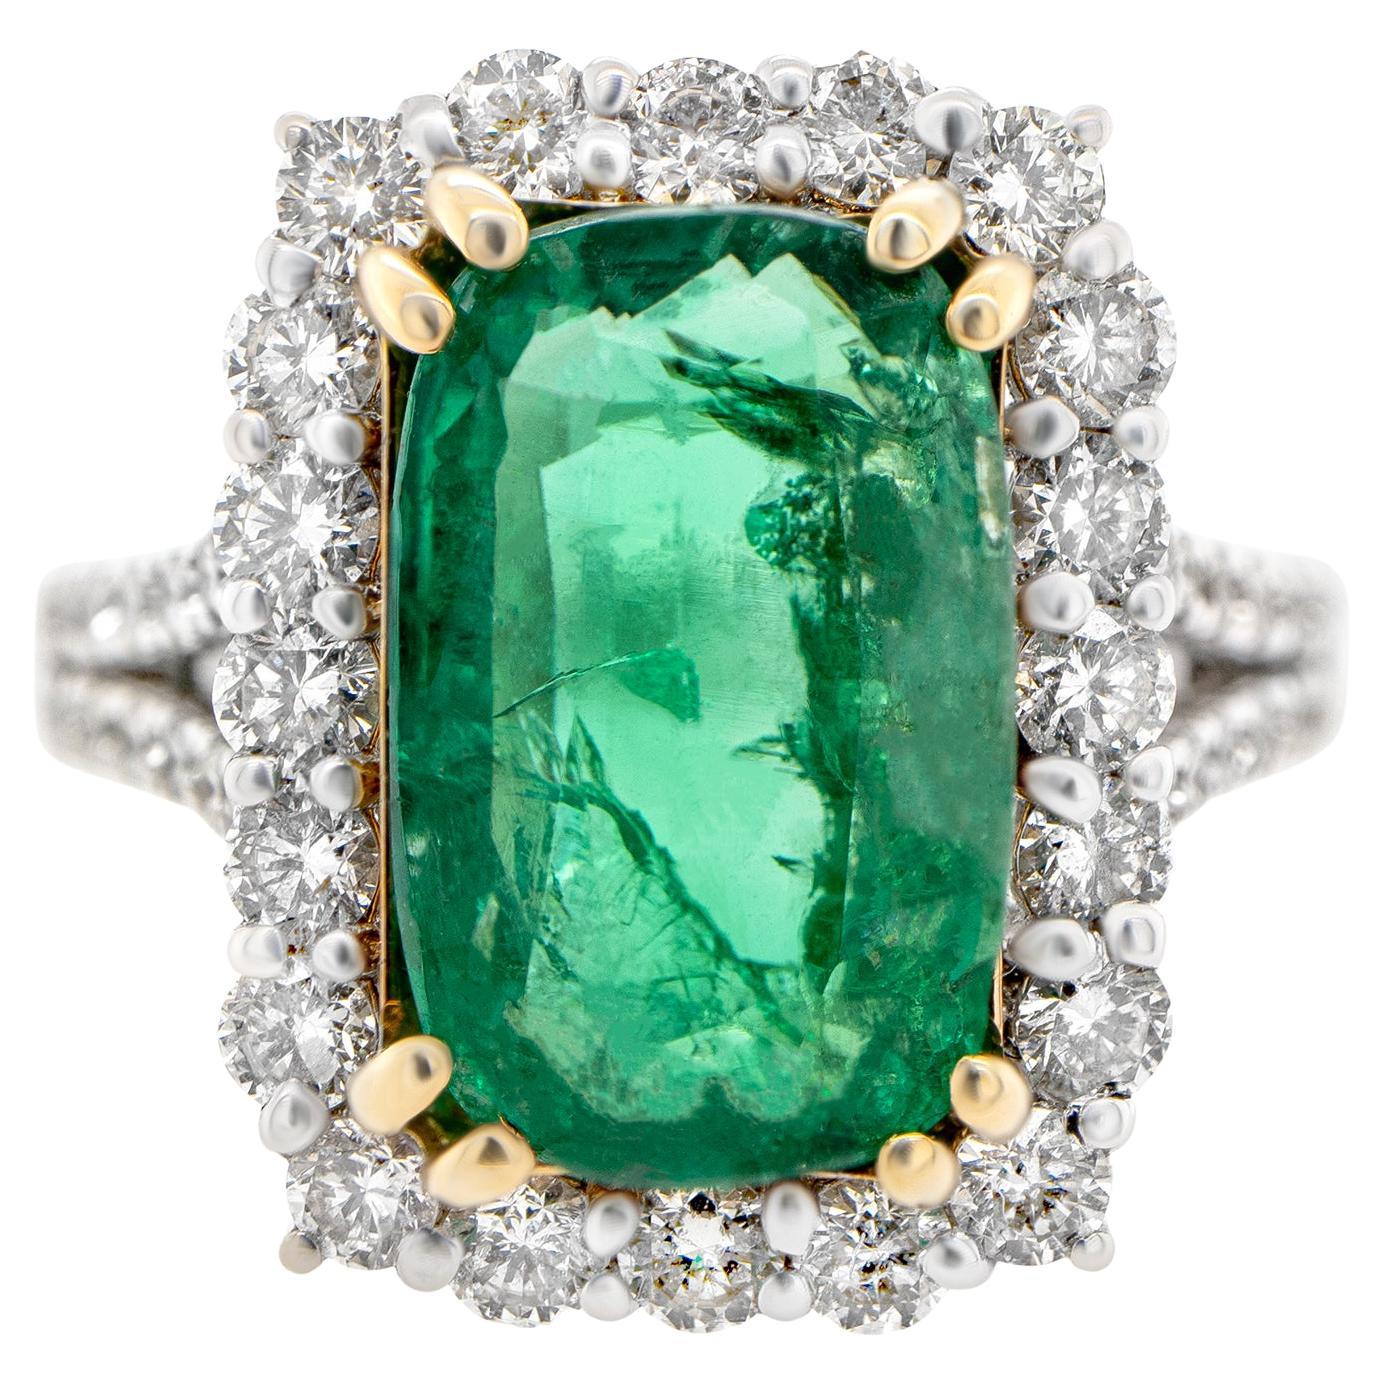 Emerald Ring With Diamond Halo Setting 5.12 Carats 18K Gold